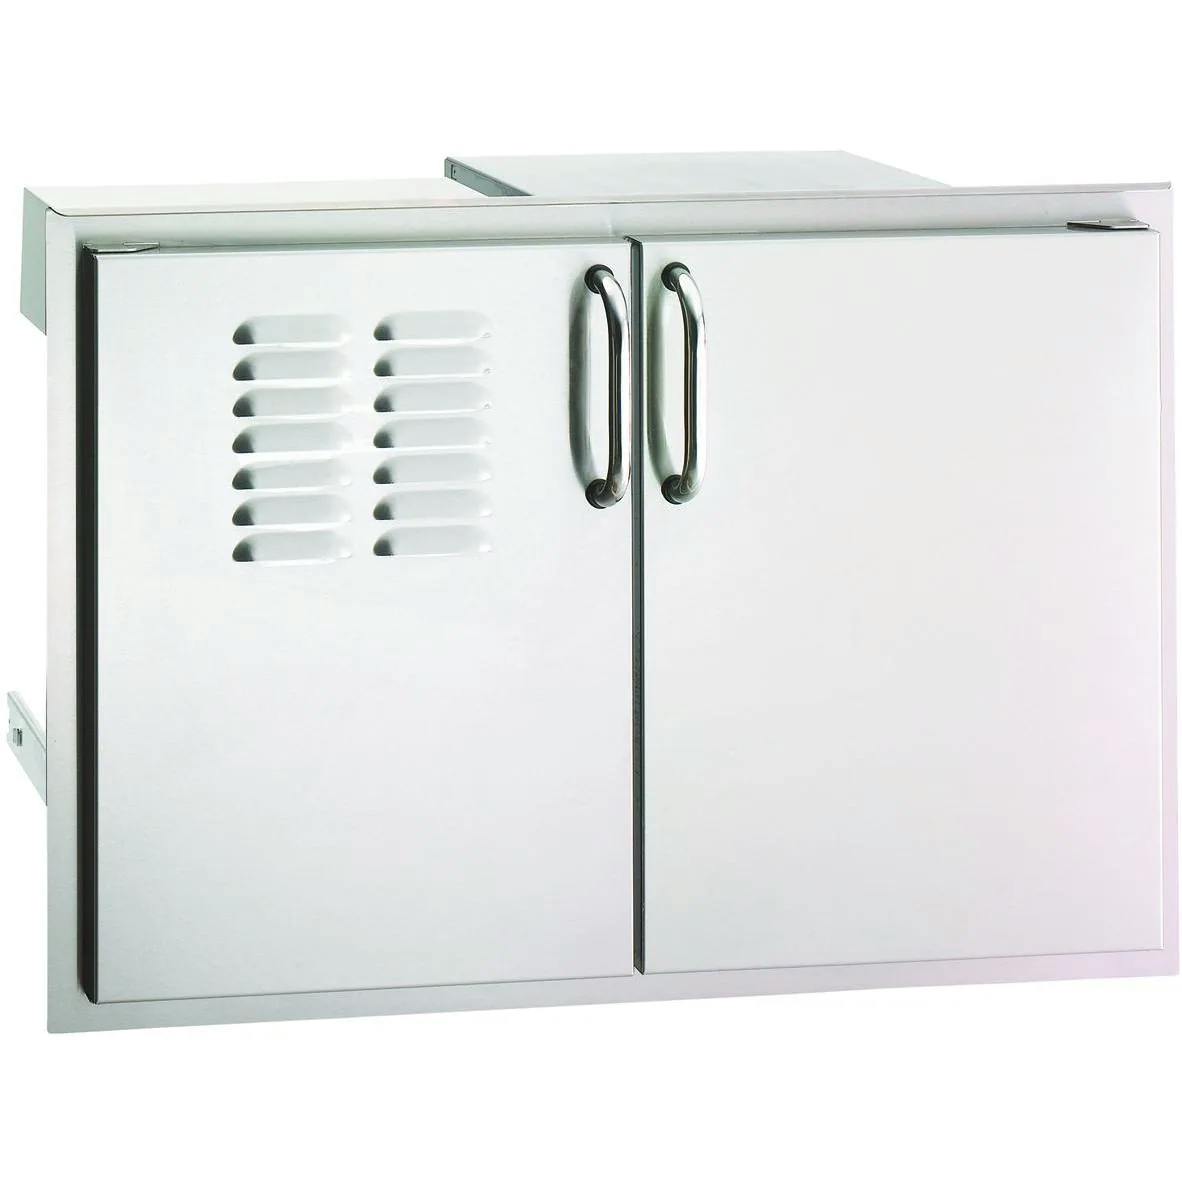 Fire Magic Select Louvered Double Door with Drawers and Propane Tank Storage